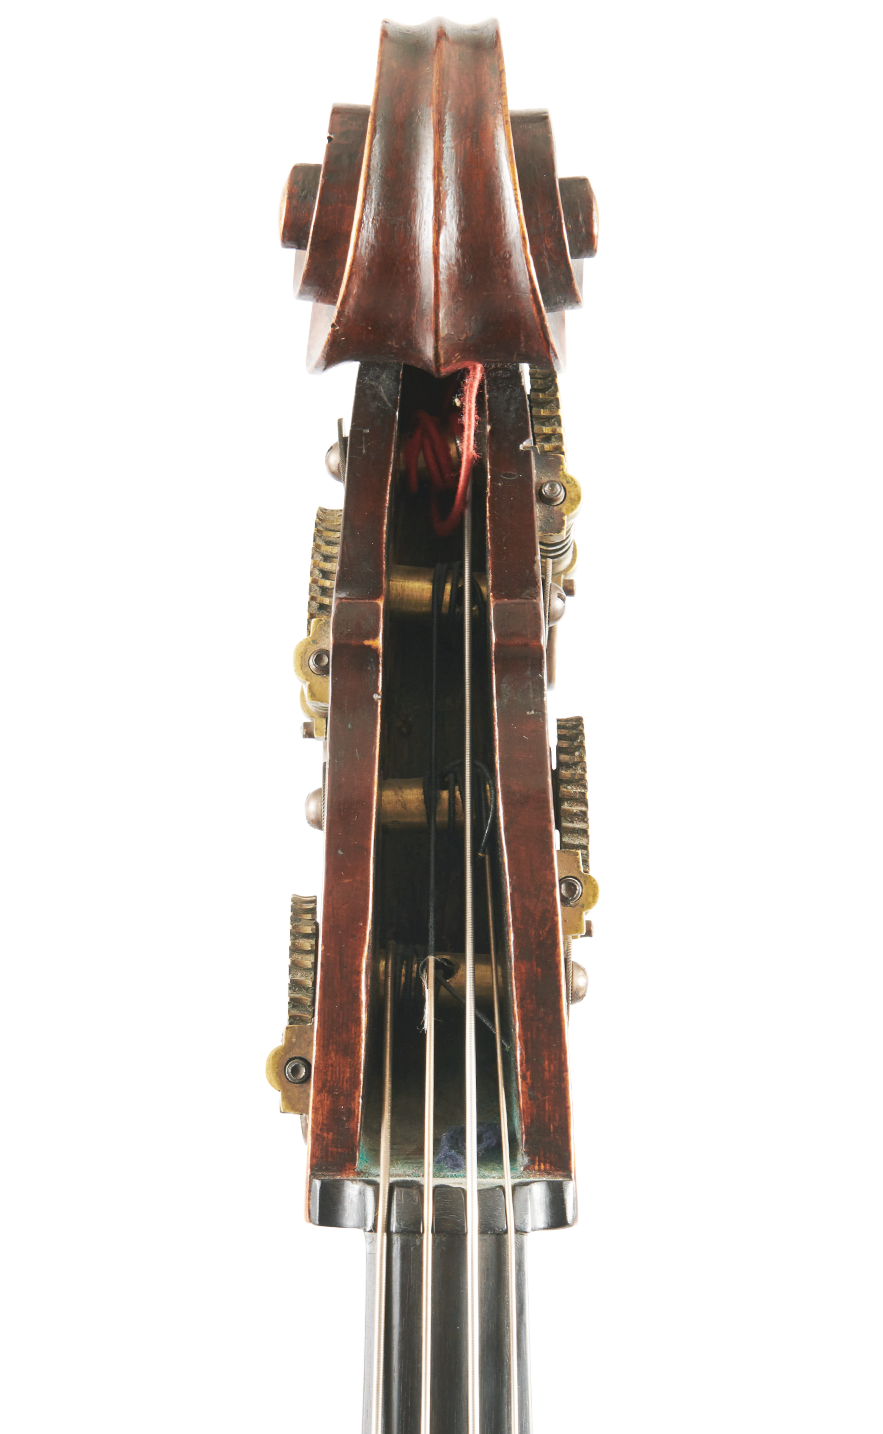 Fuber Double Bass front scroll